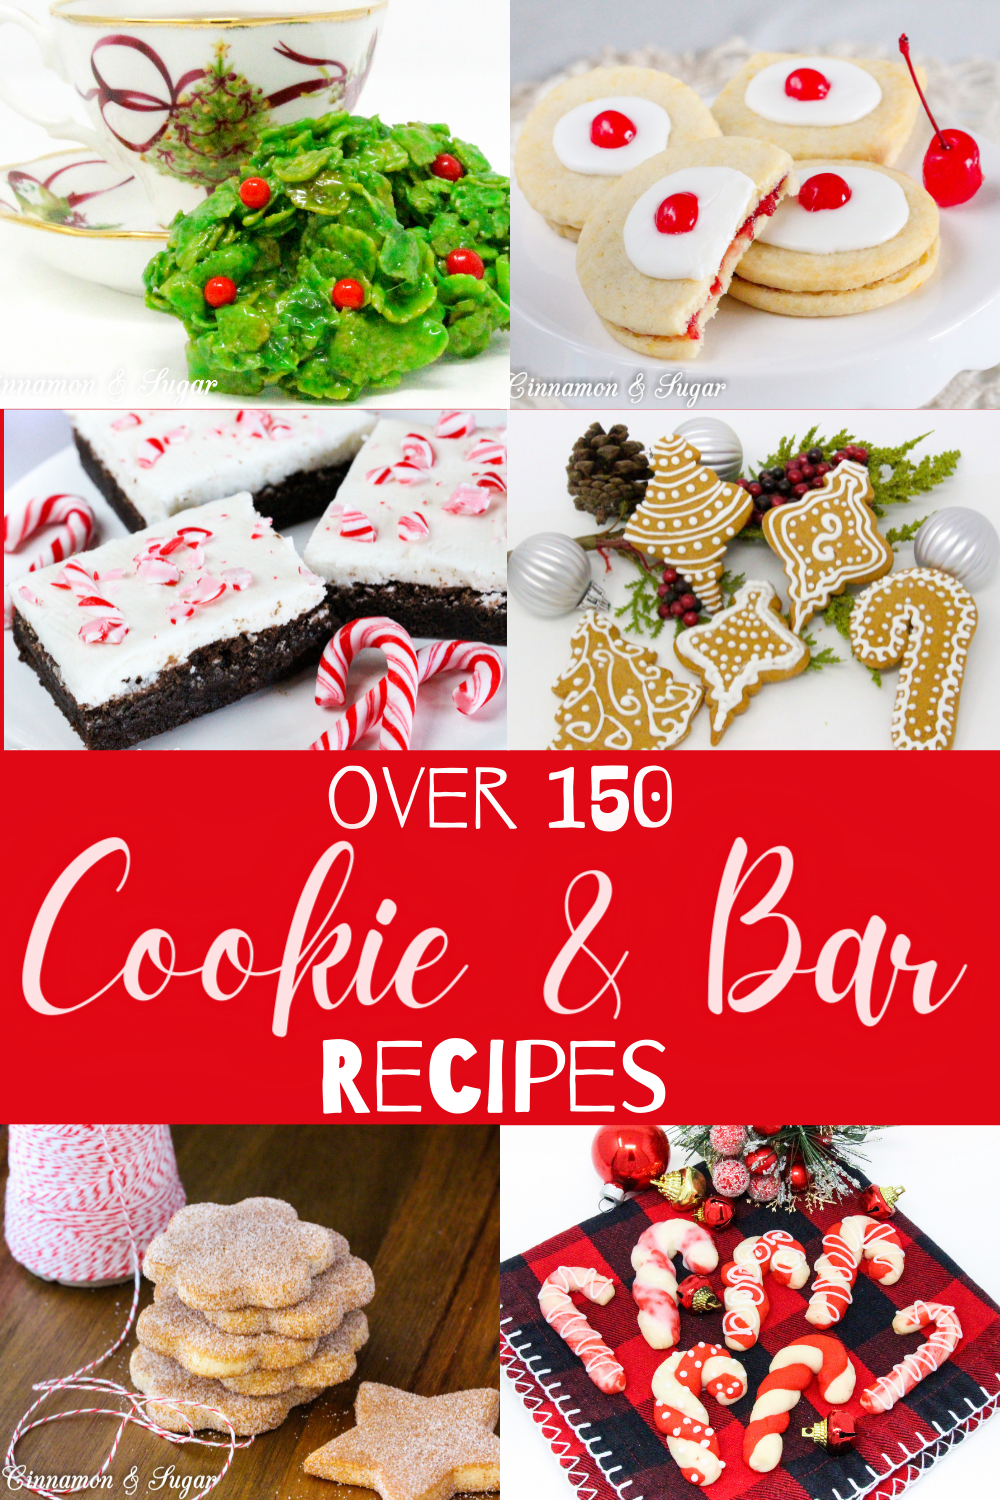 Over 150 Cookie and Bar recipes, including some for your furry friends! 